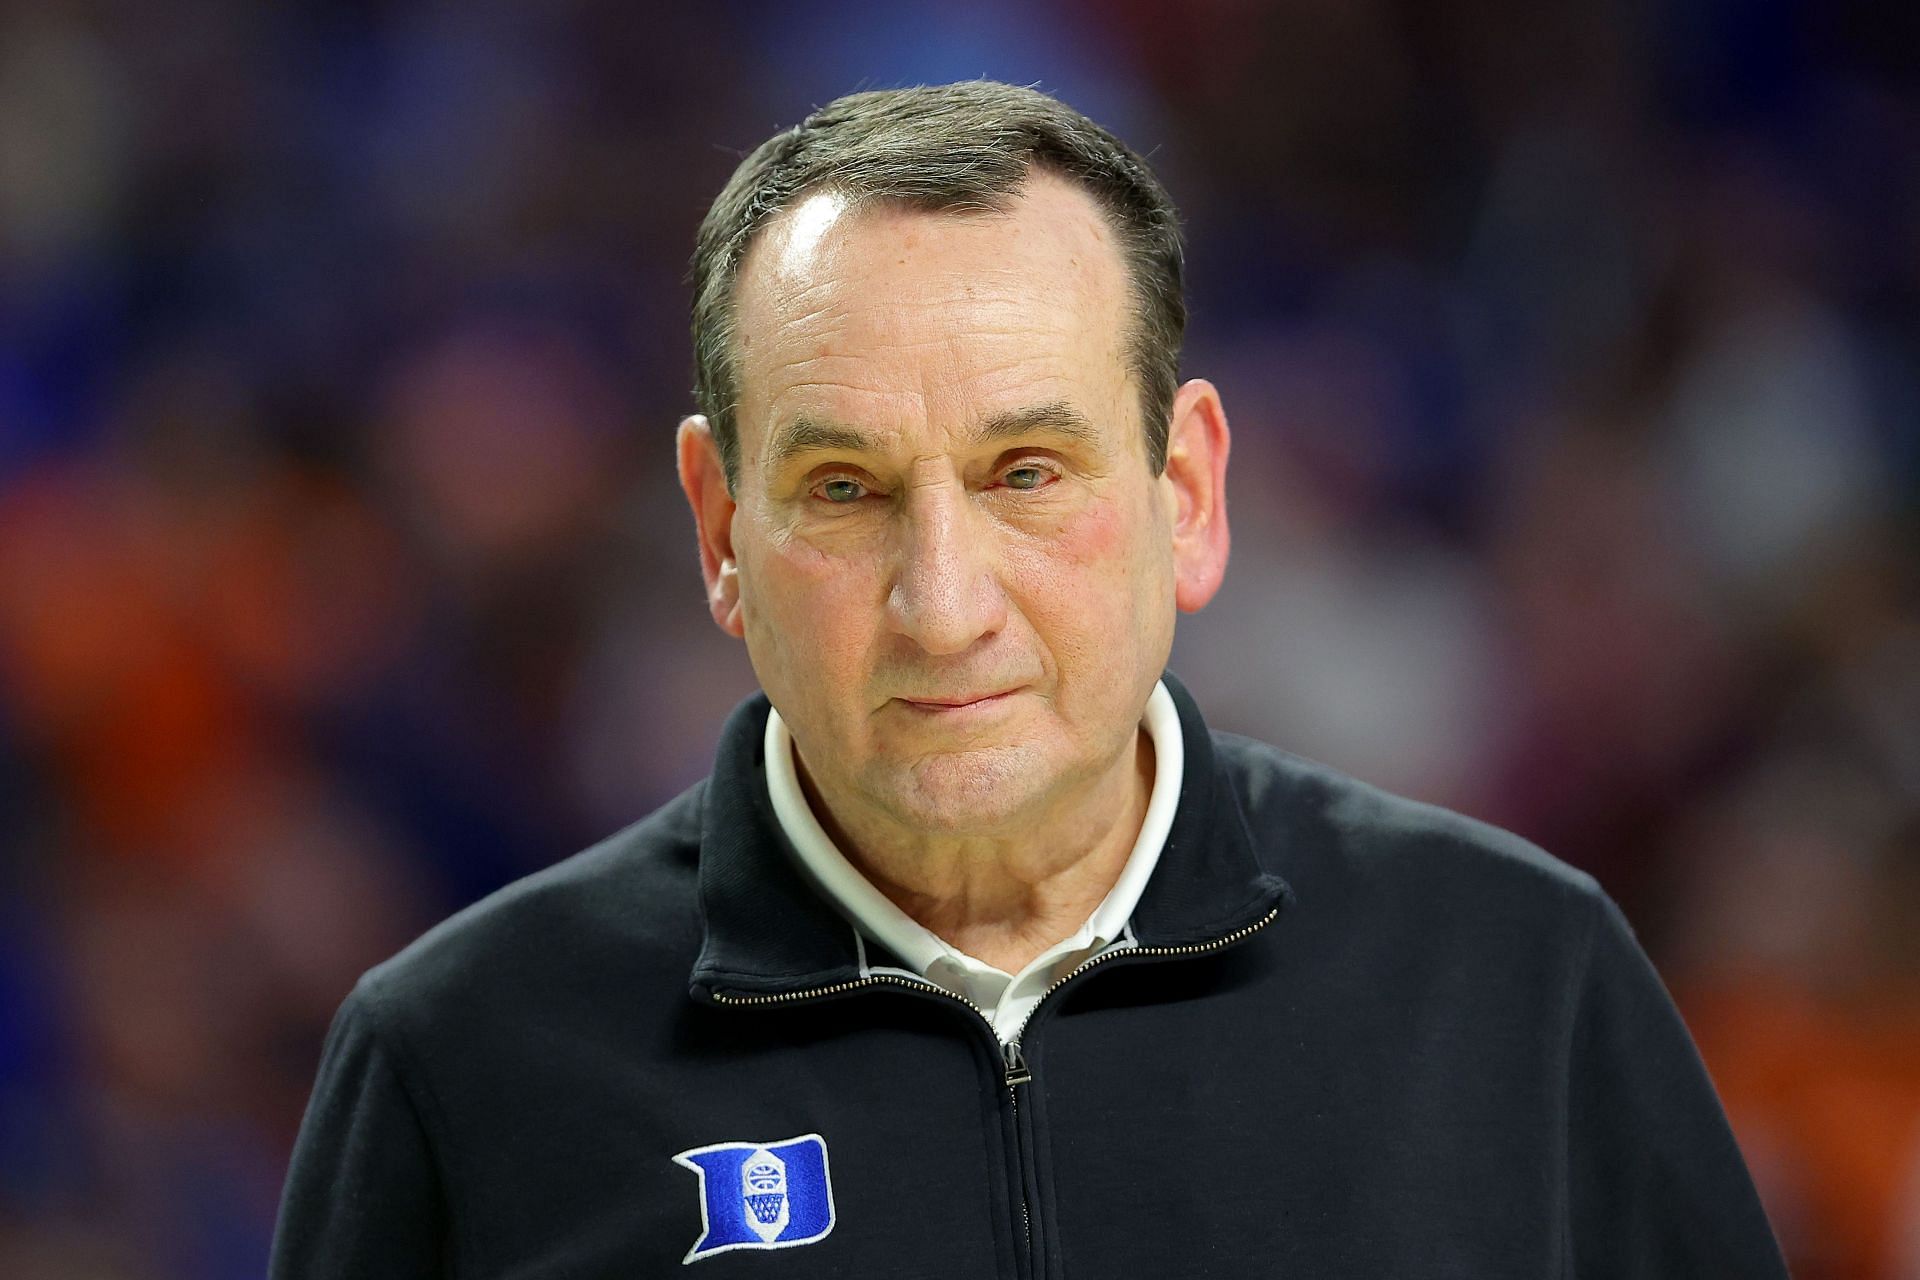 Coach K&#039;s retirement looms, but the Duke Blue Devils and Paolo Banchero are not ready for the end.